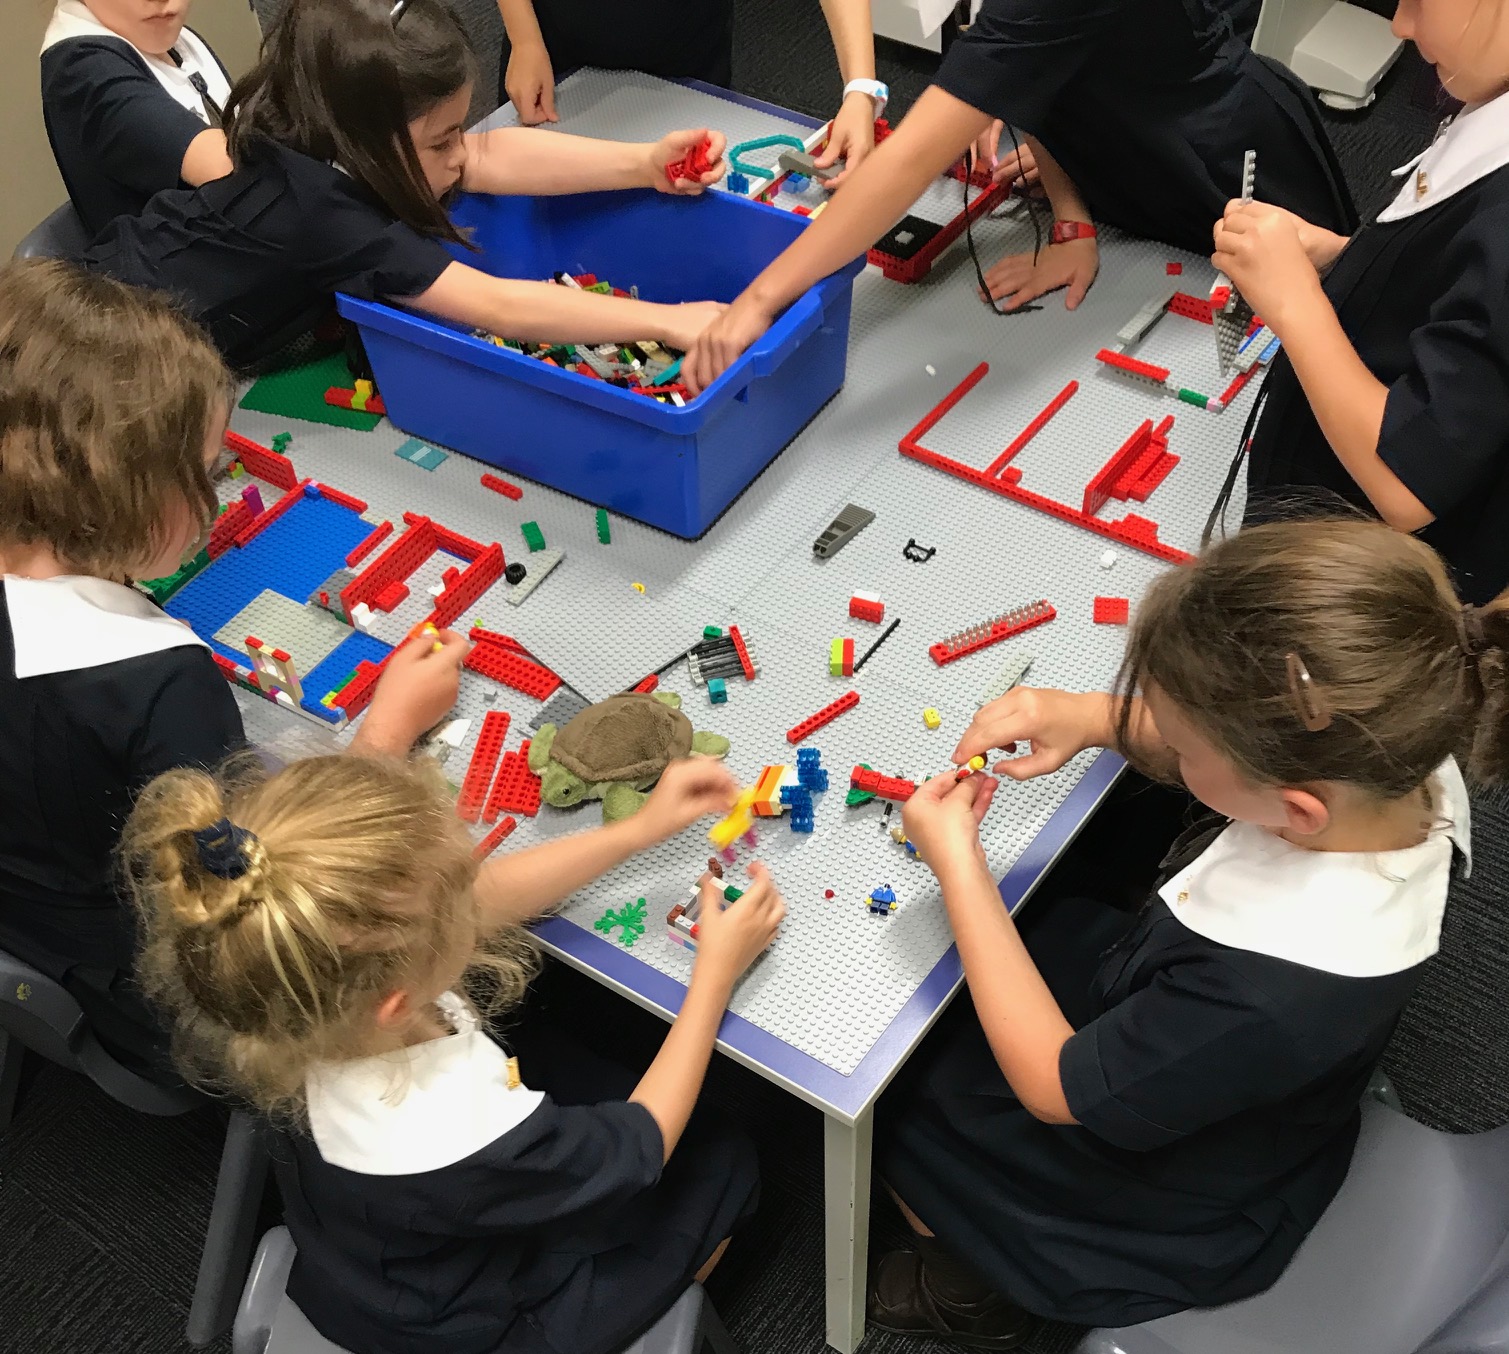 Children building together with connecting blocks around a table